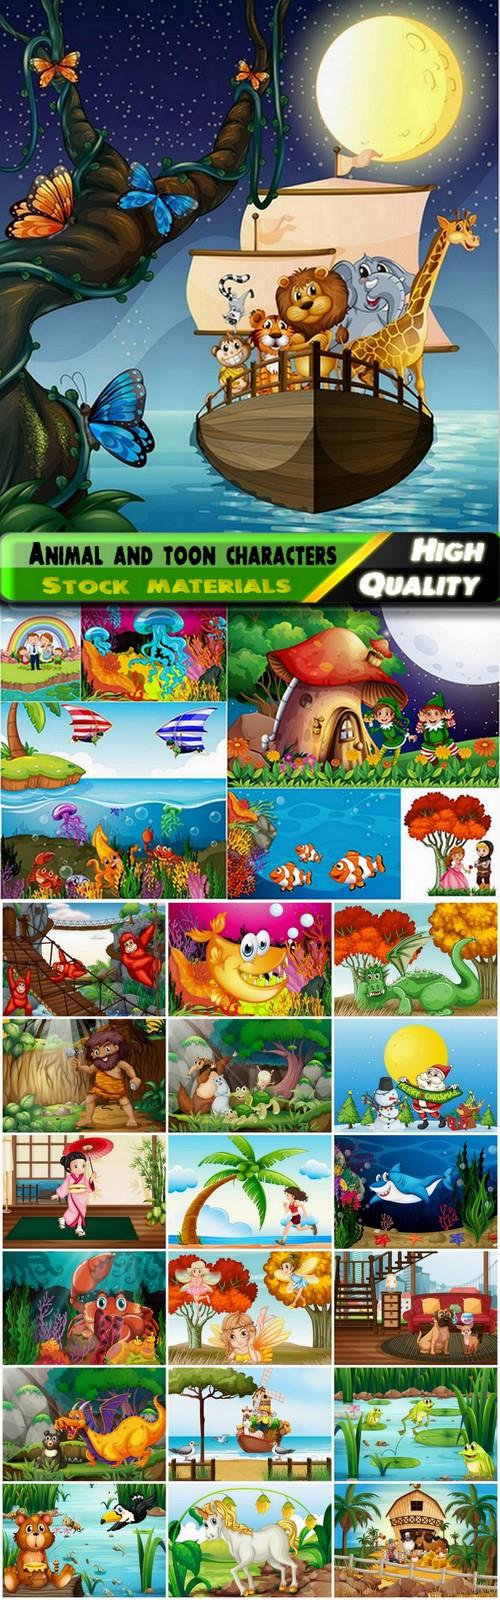 Landscape with animal and toon characters - 25 Eps